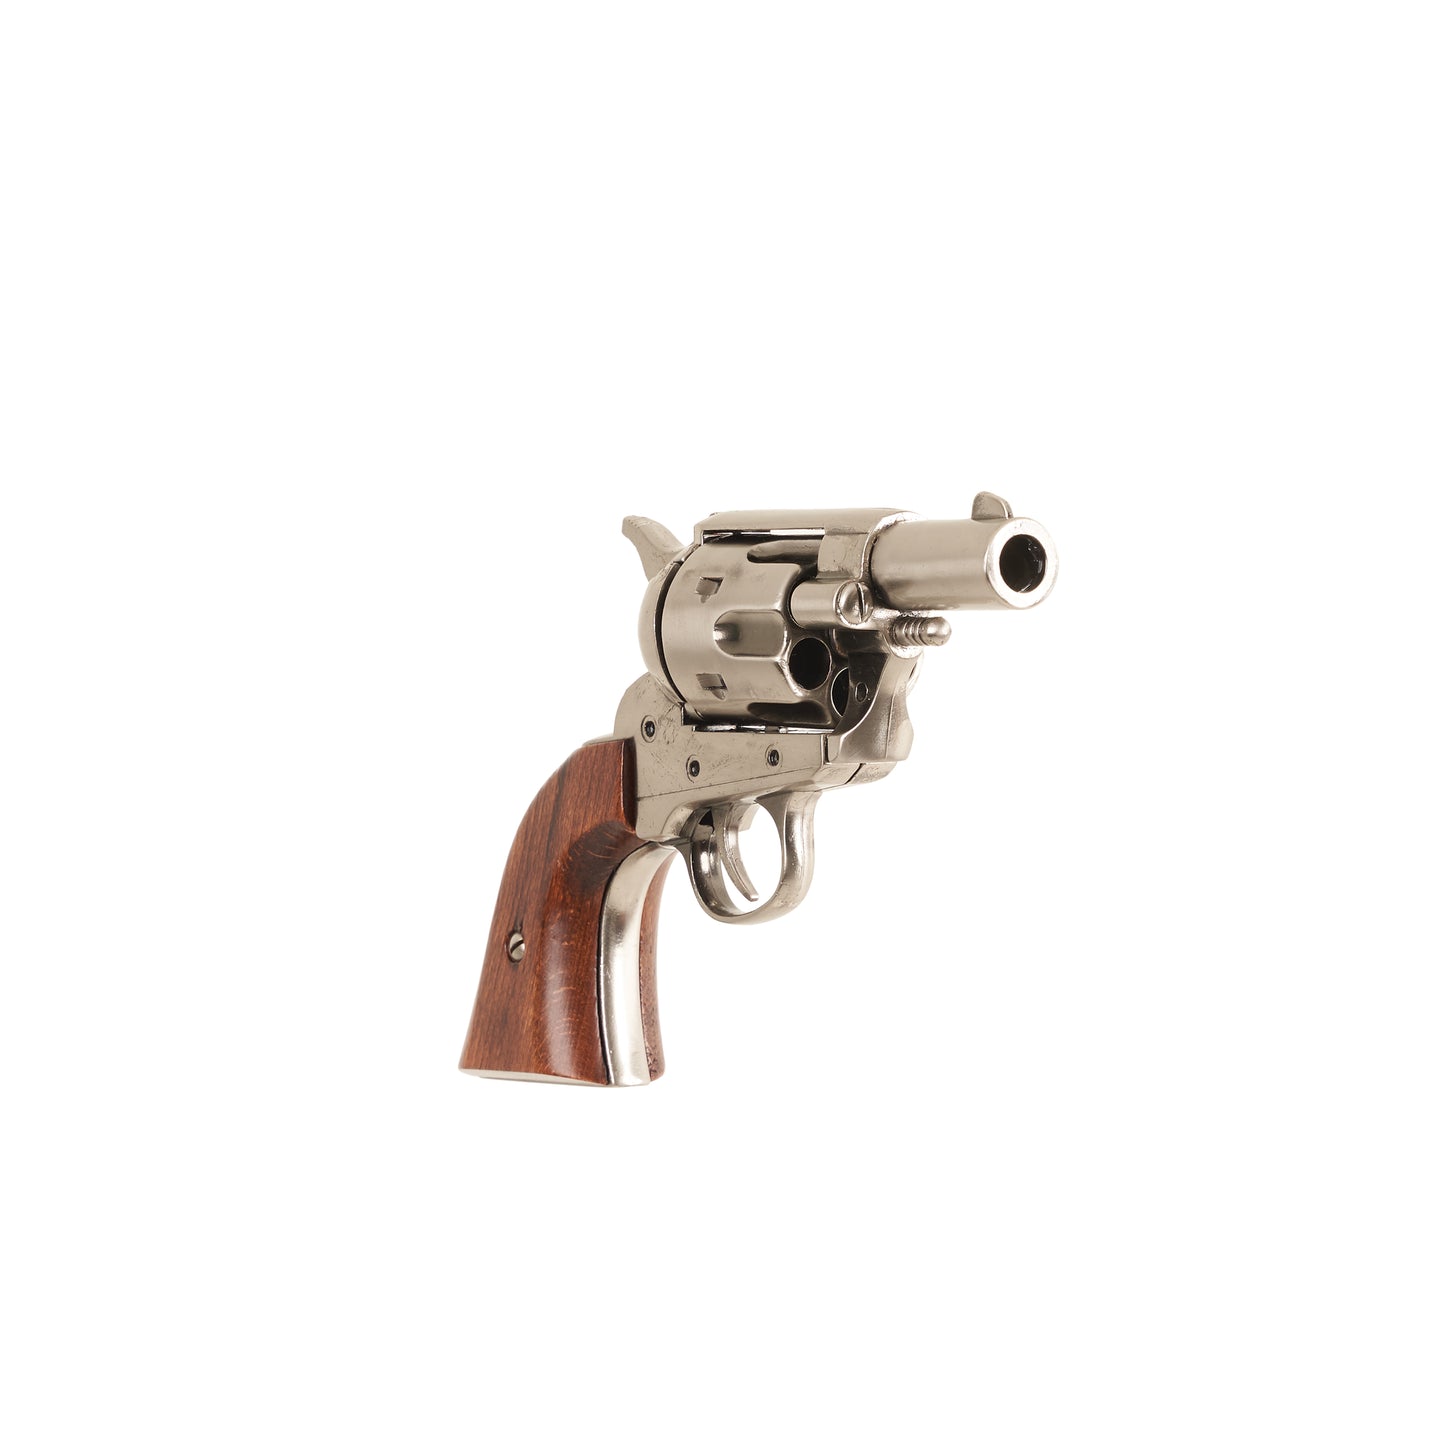 Front view of polished nickel Non-Firing 1873 .45 Caliber Short Revolver with wood grip.